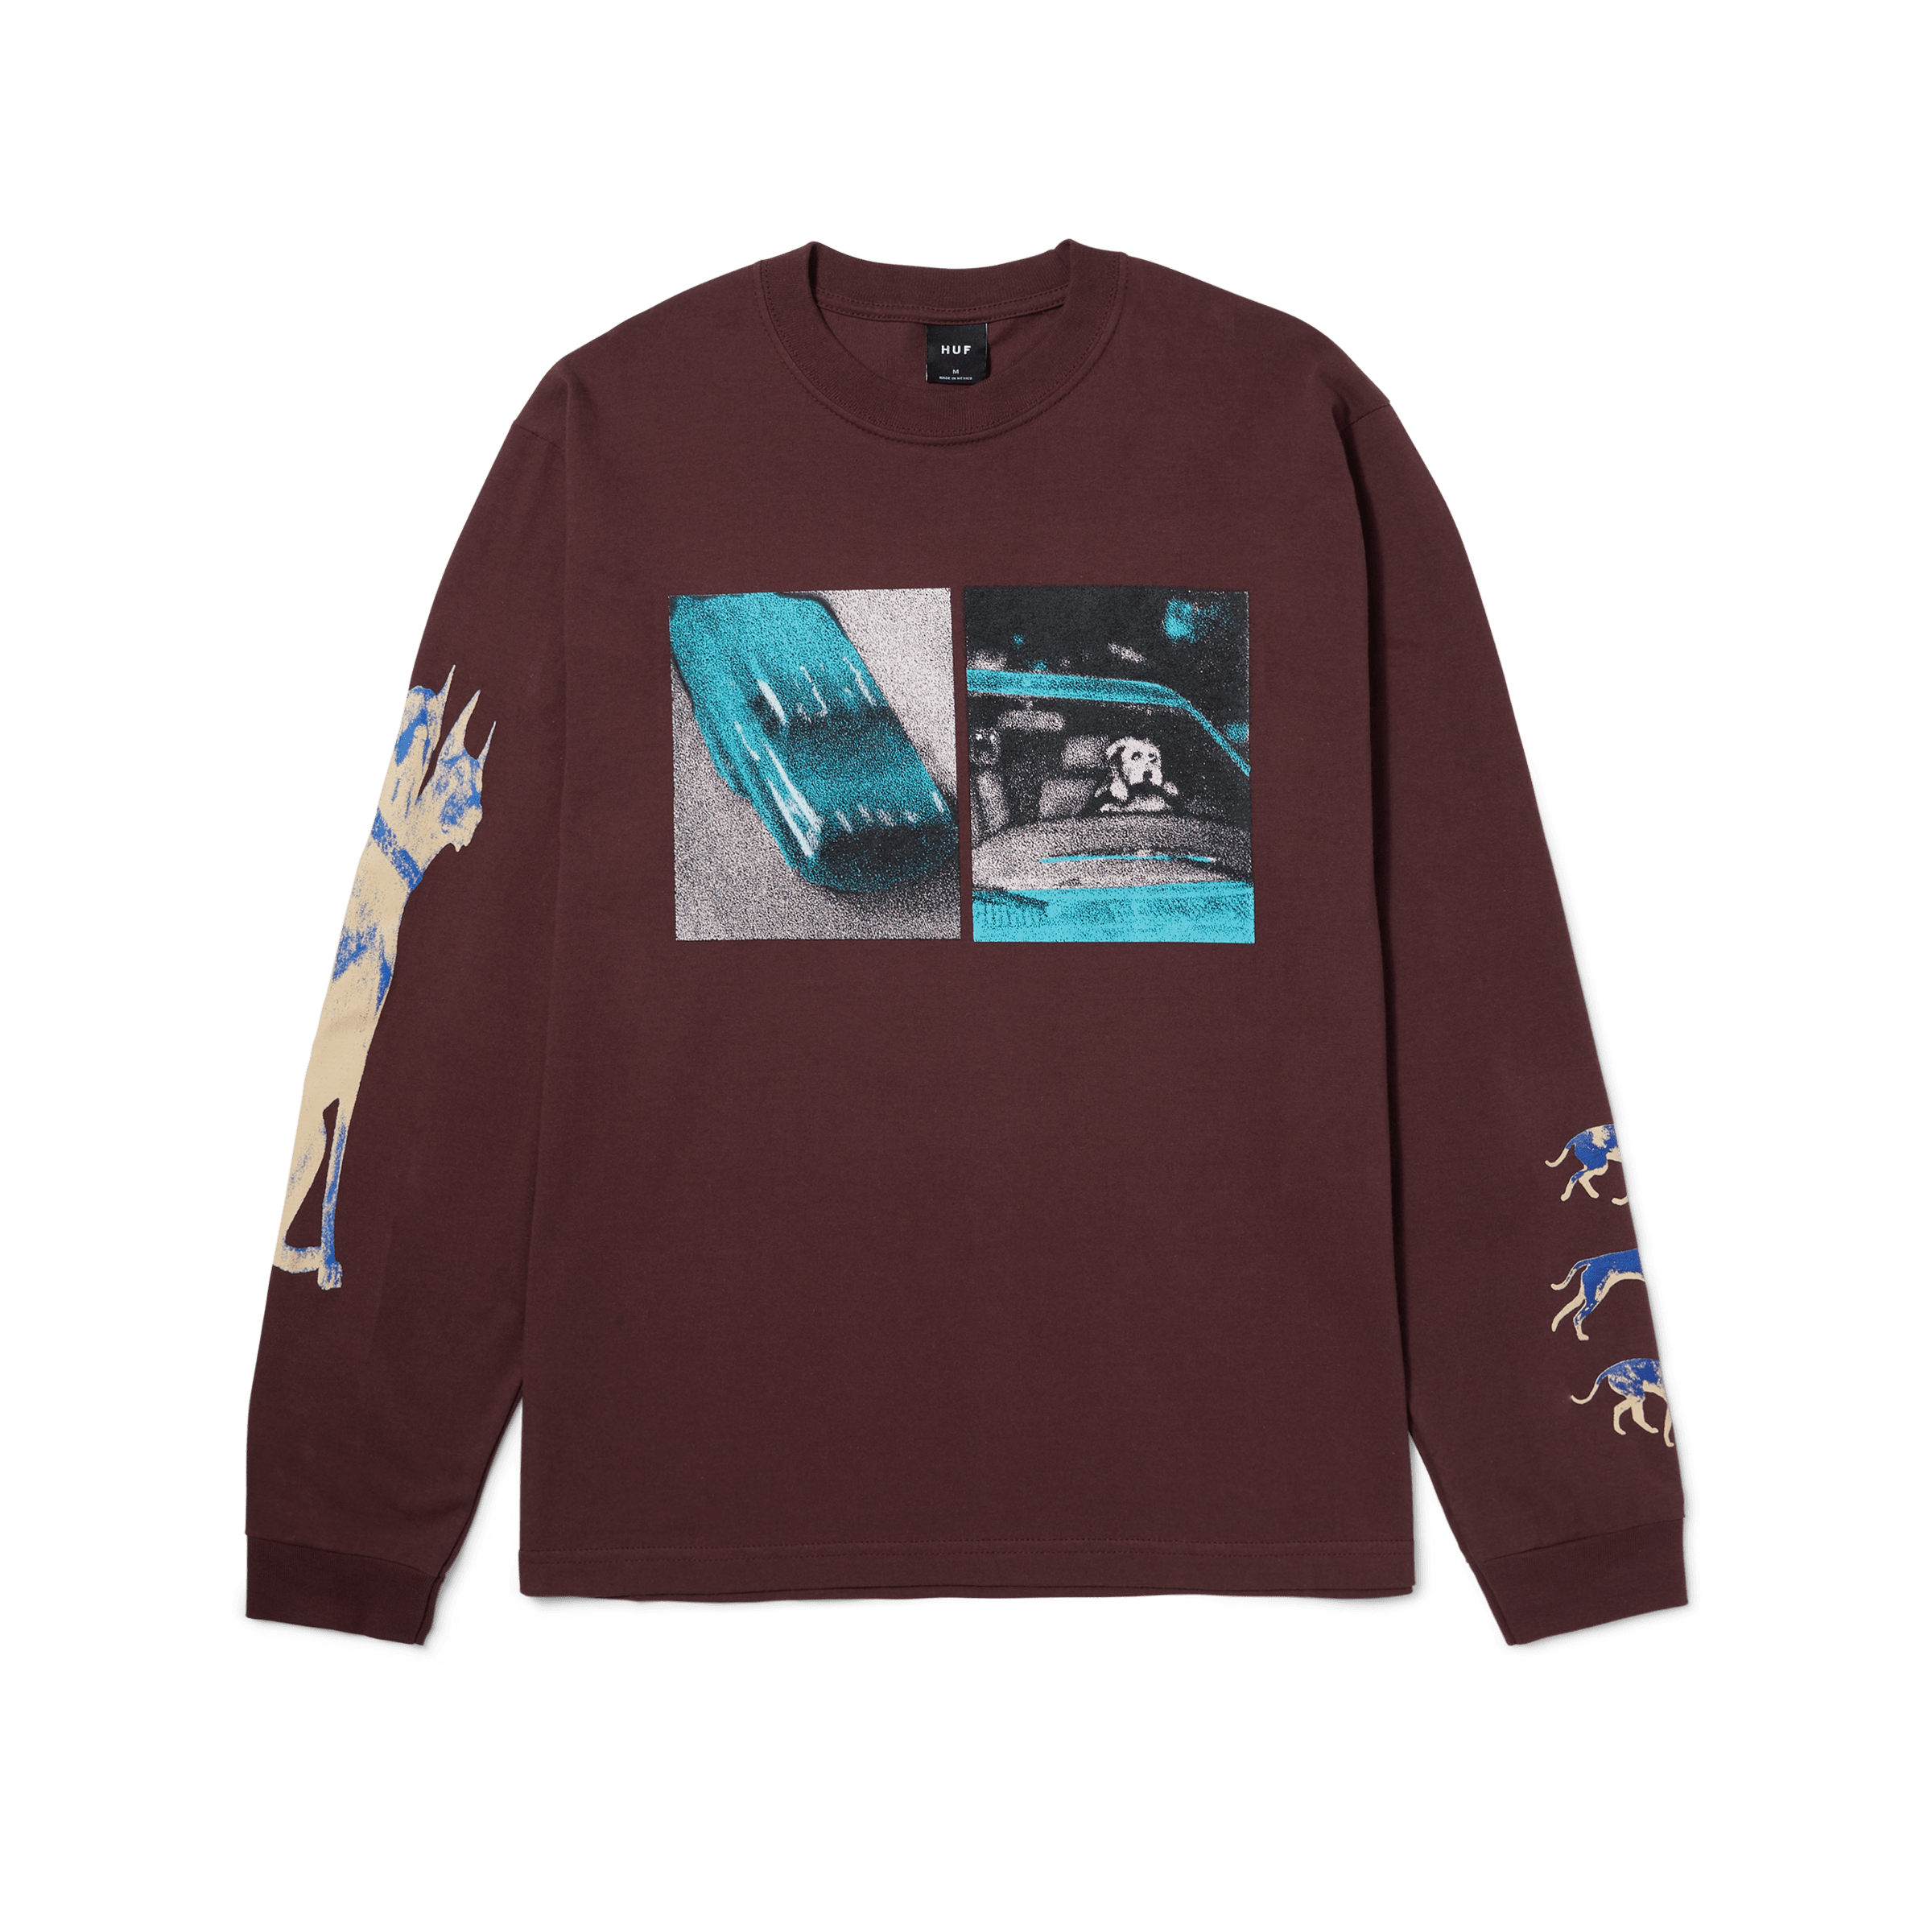 Vancouver long sleeve t-shirt in Econyl. – Tryst Stockholm